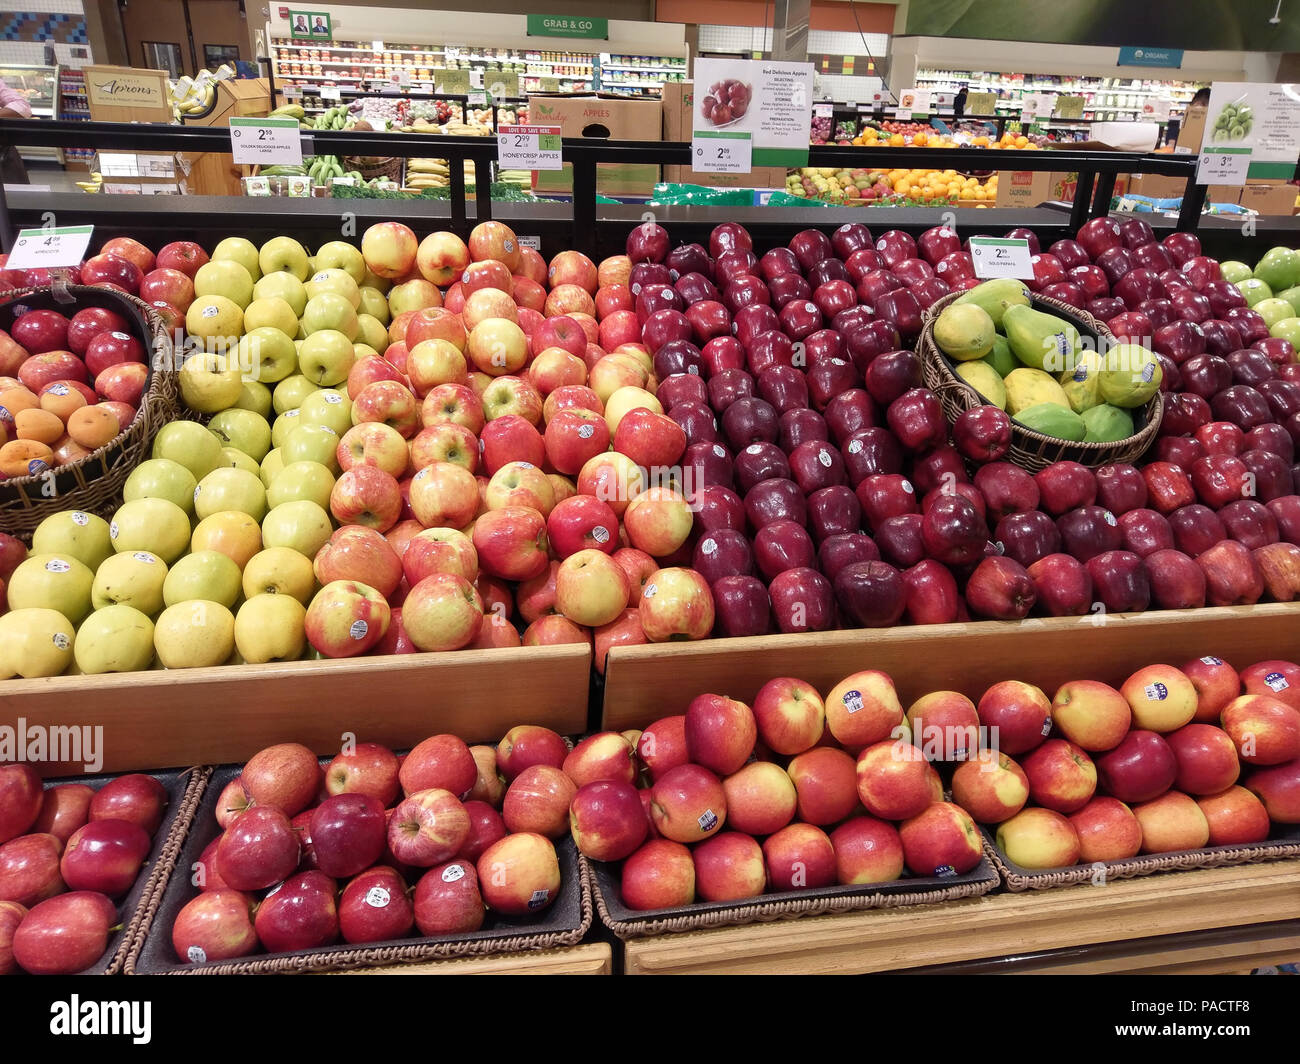 ORLANDO, USA - JUNE 30th, 2018: Fresh fruit on display in a supermarket Stock Photo